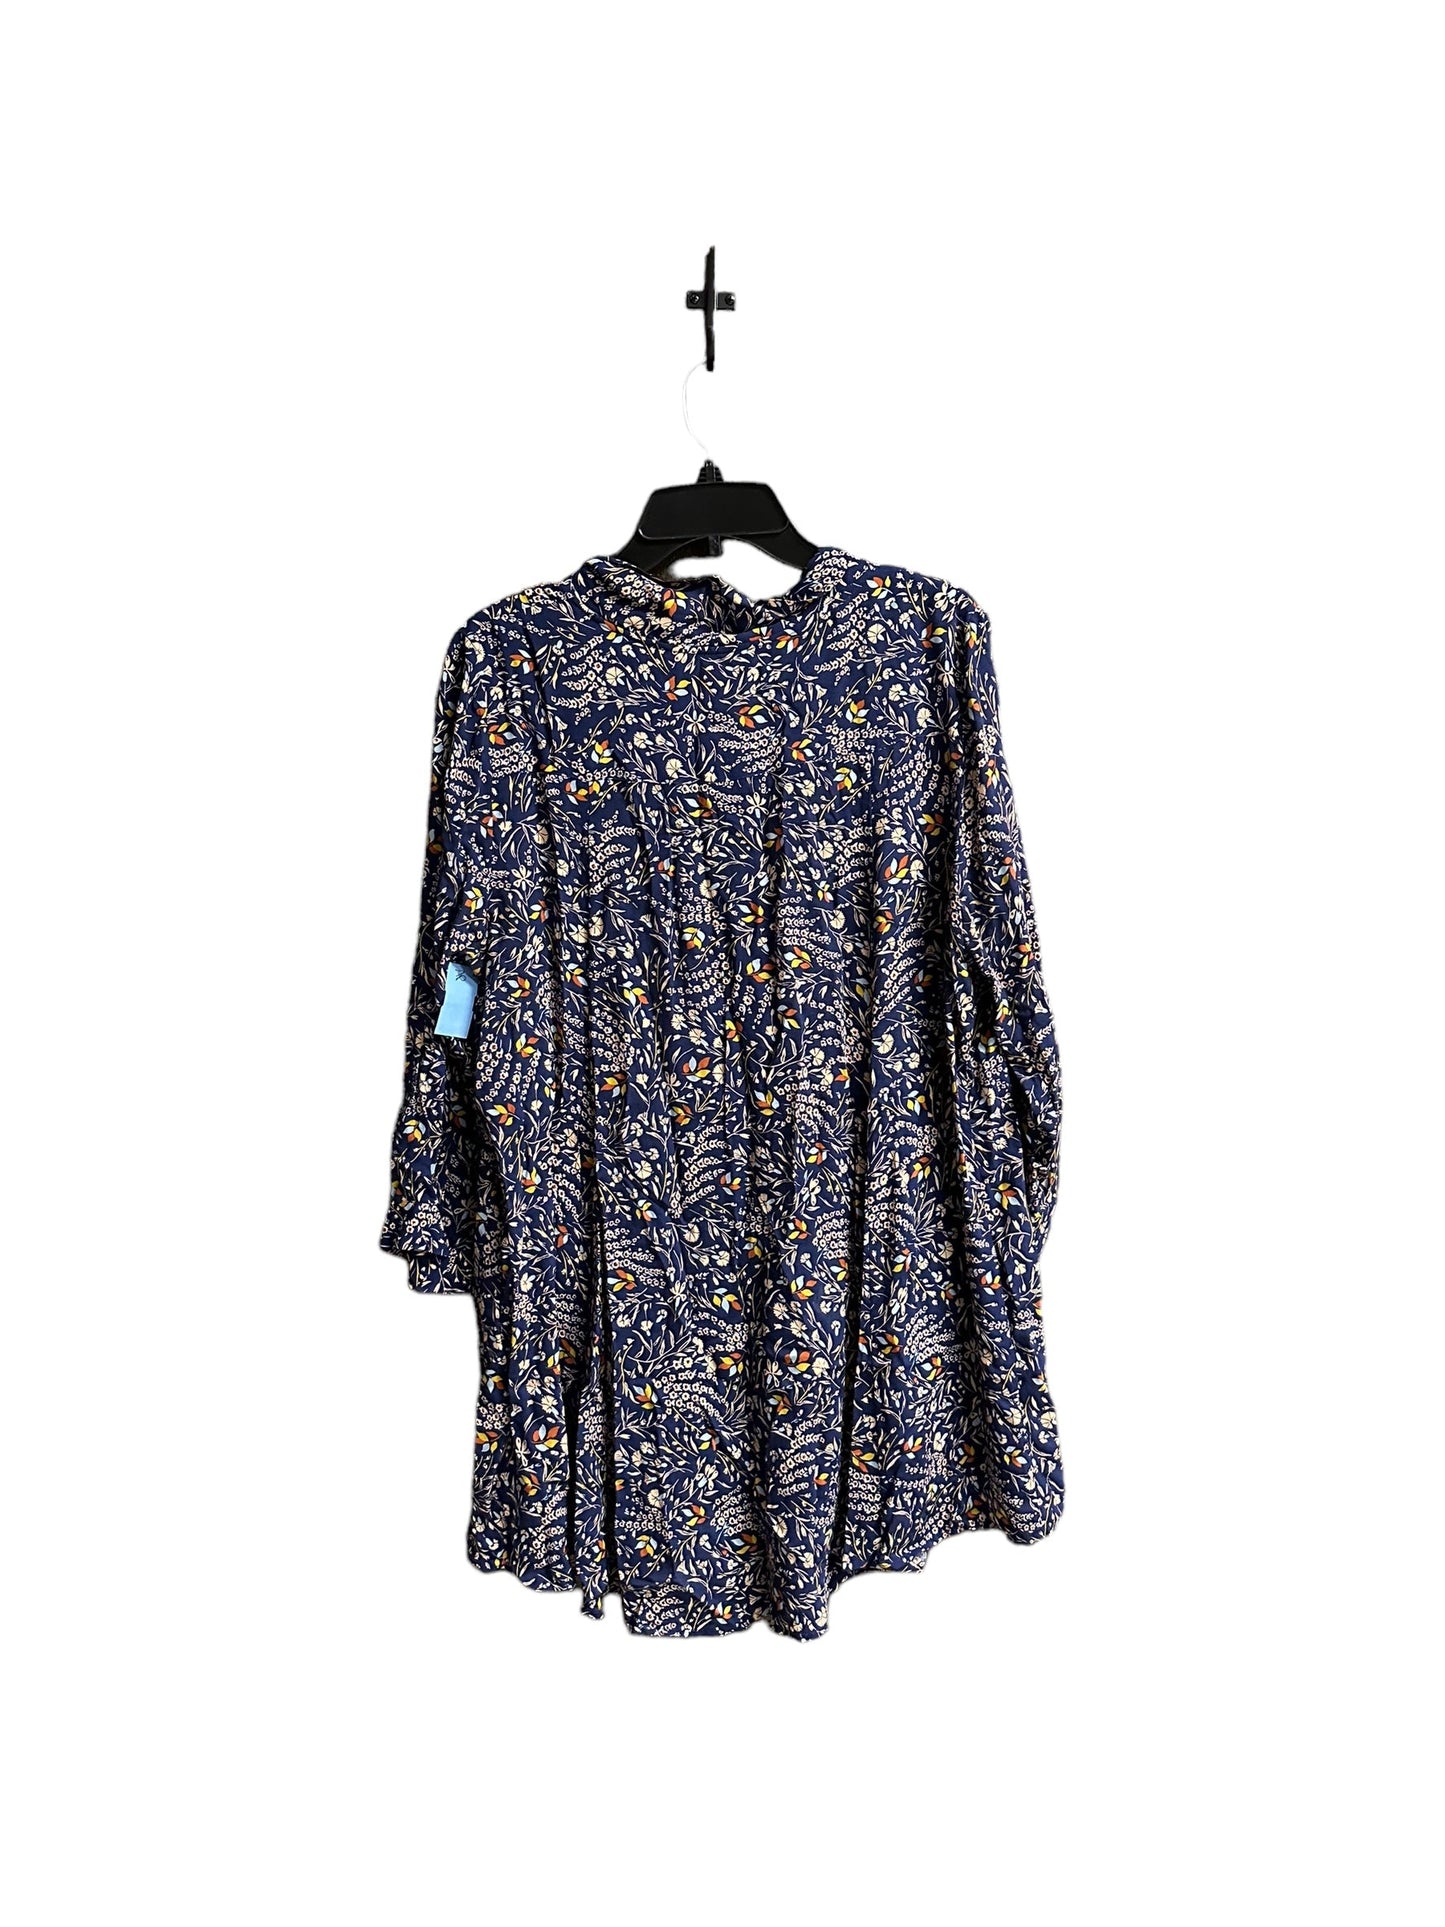 Floral Top Long Sleeve Maeve, Size L